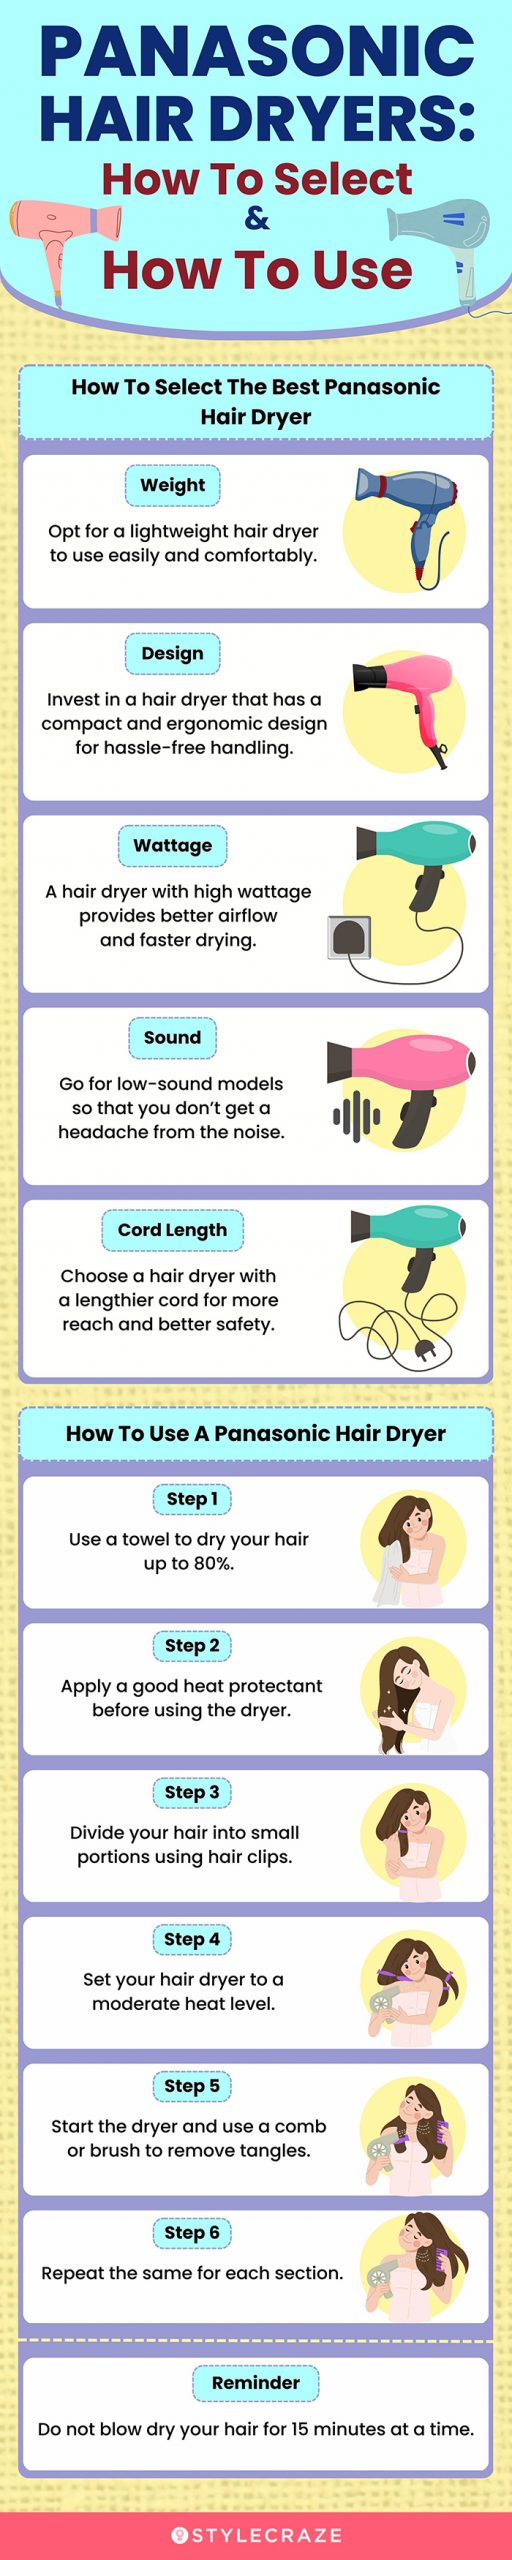 Panasonic Hair Dryers: How To Select & How To Use (infographic)